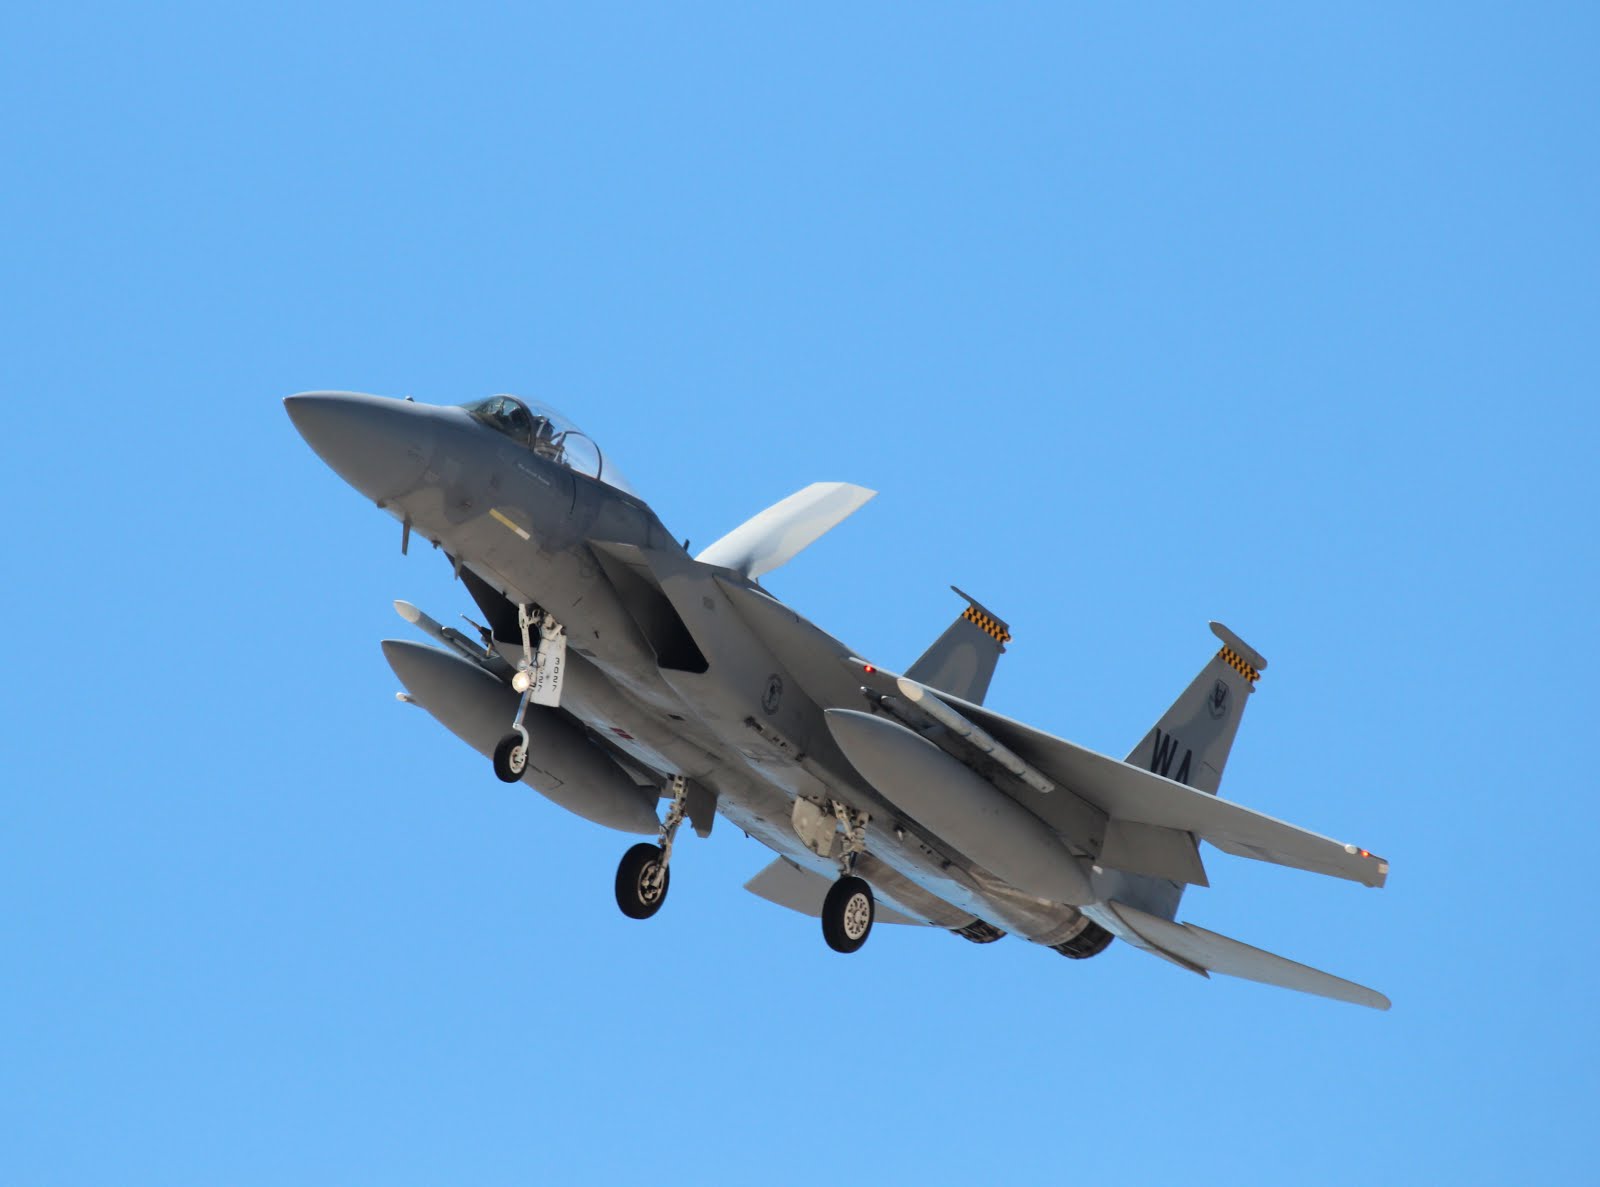 Nellis AFB 28th May 2015